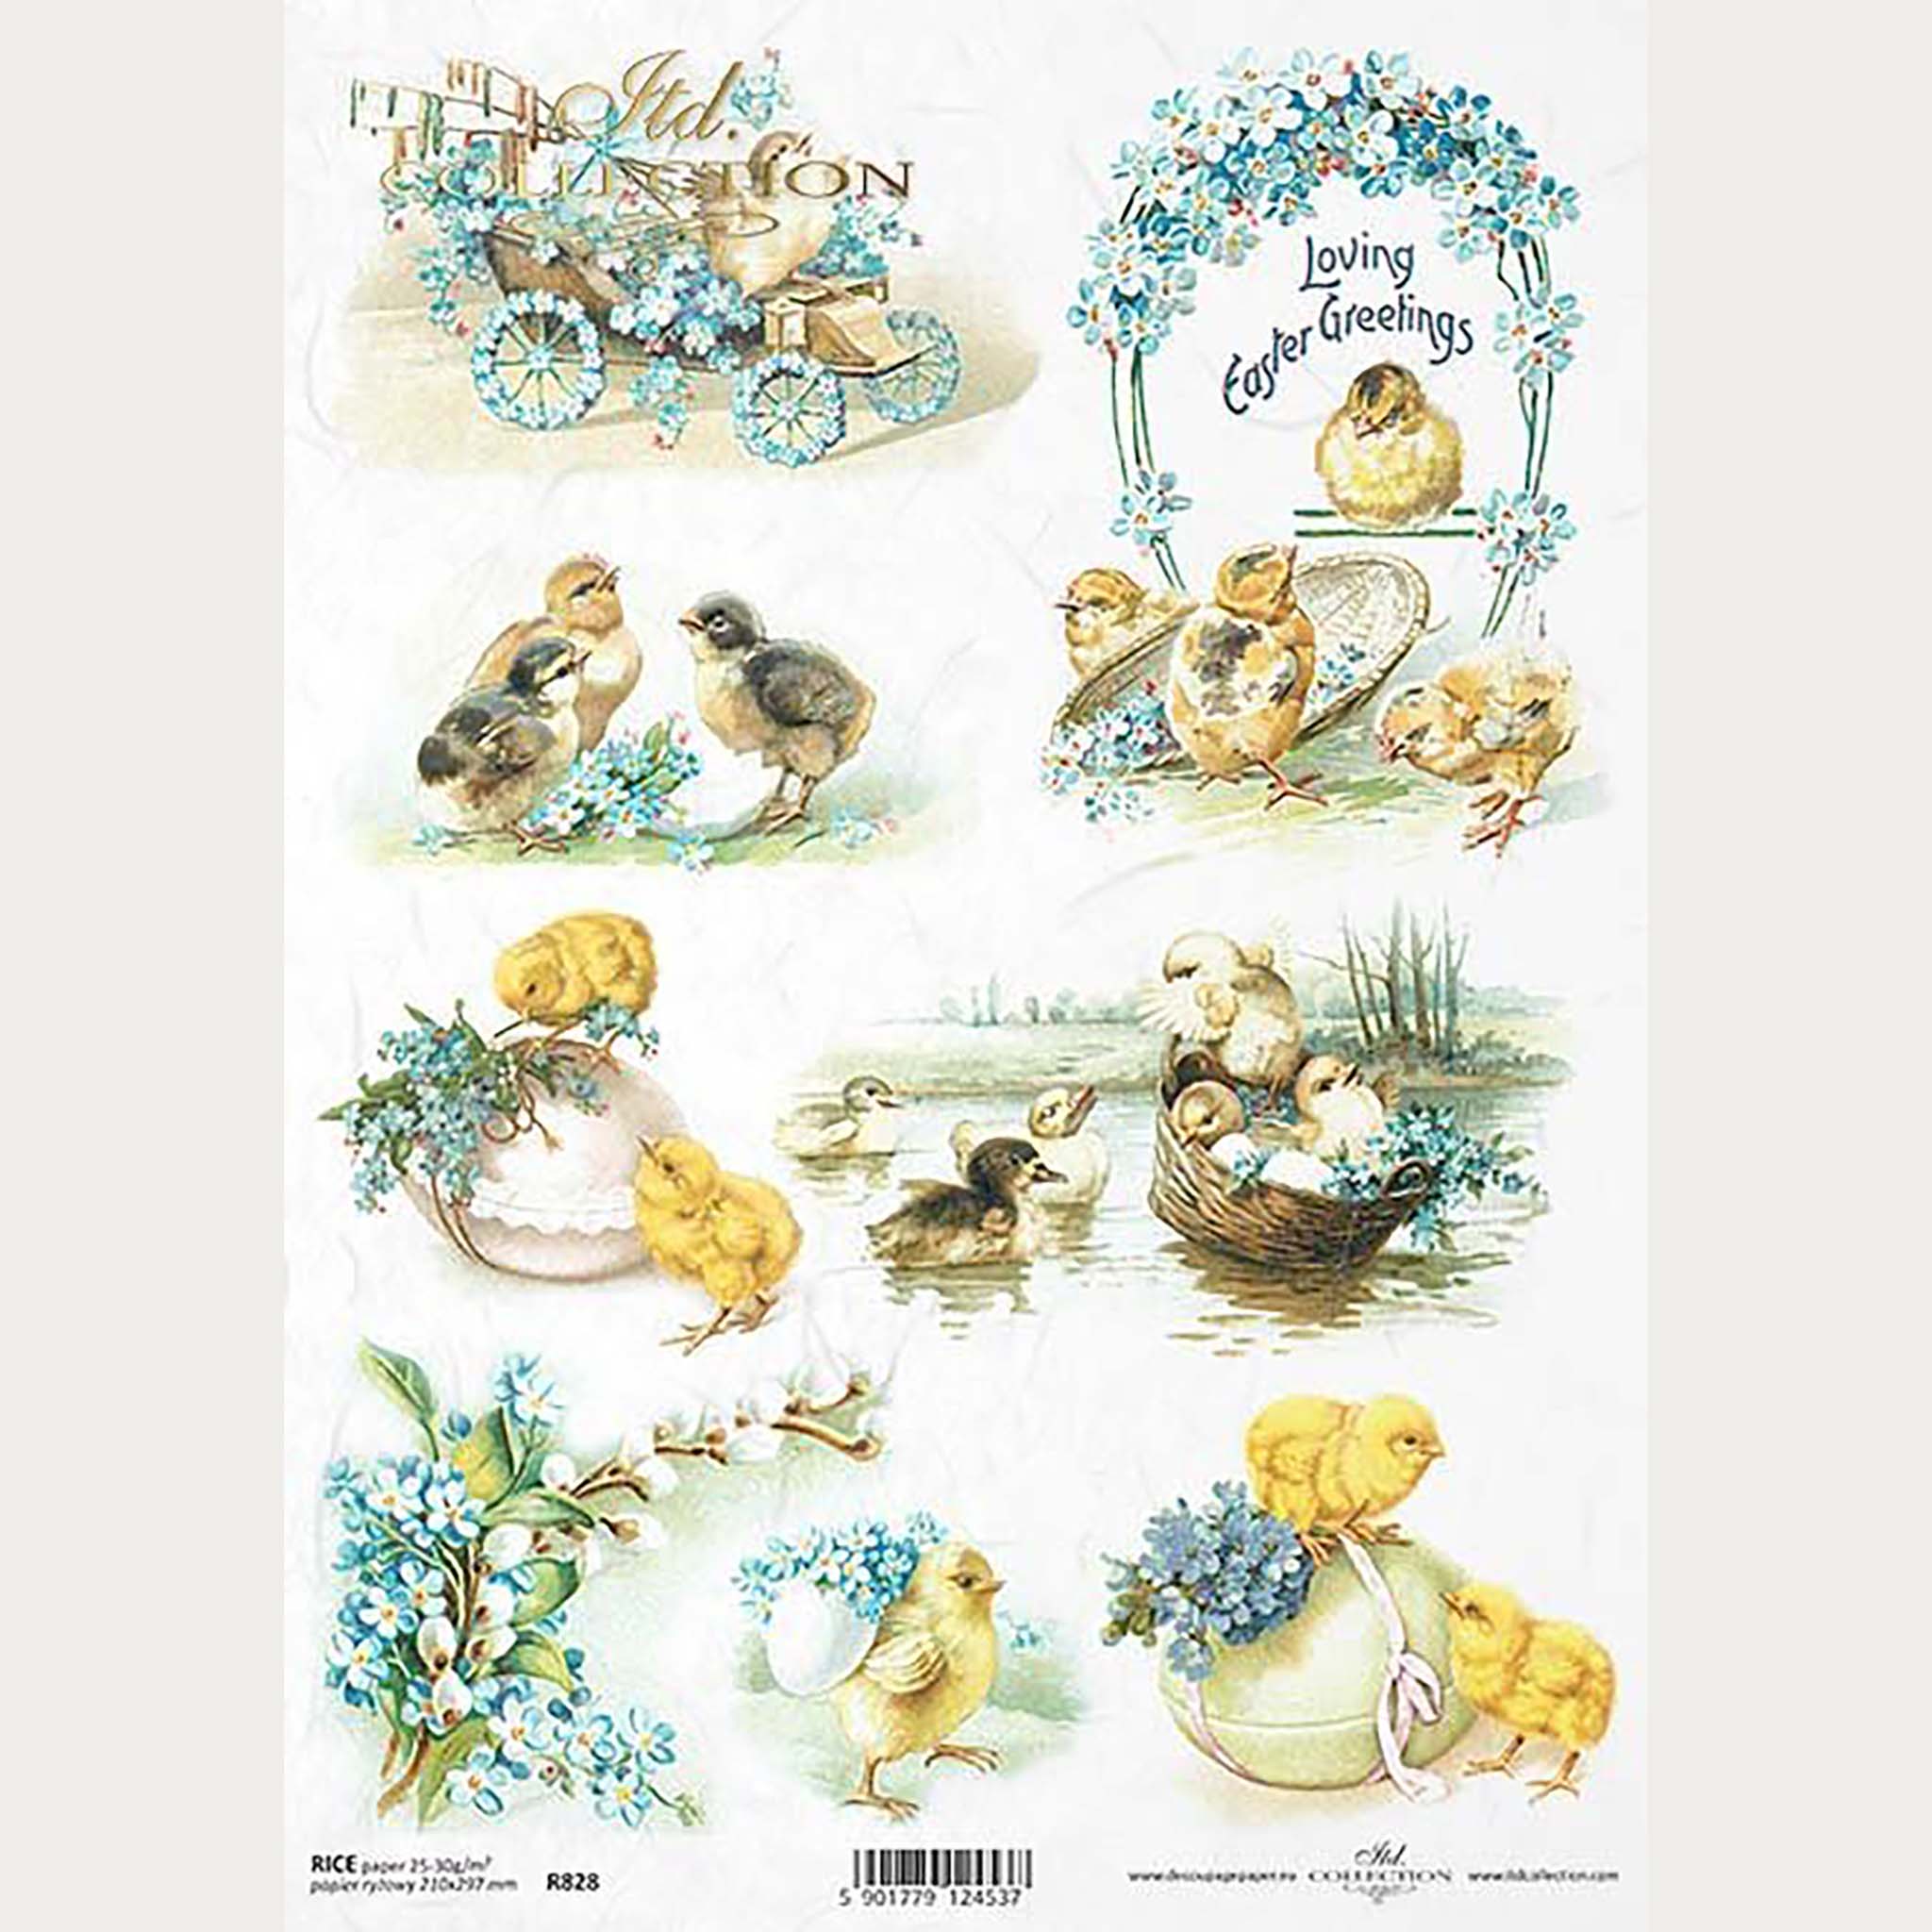 A4 rice paper designs that feature baby chicks, eggs, and bouquets of blue flowers on a carriage, wrapped around the eggs, and in an arch.